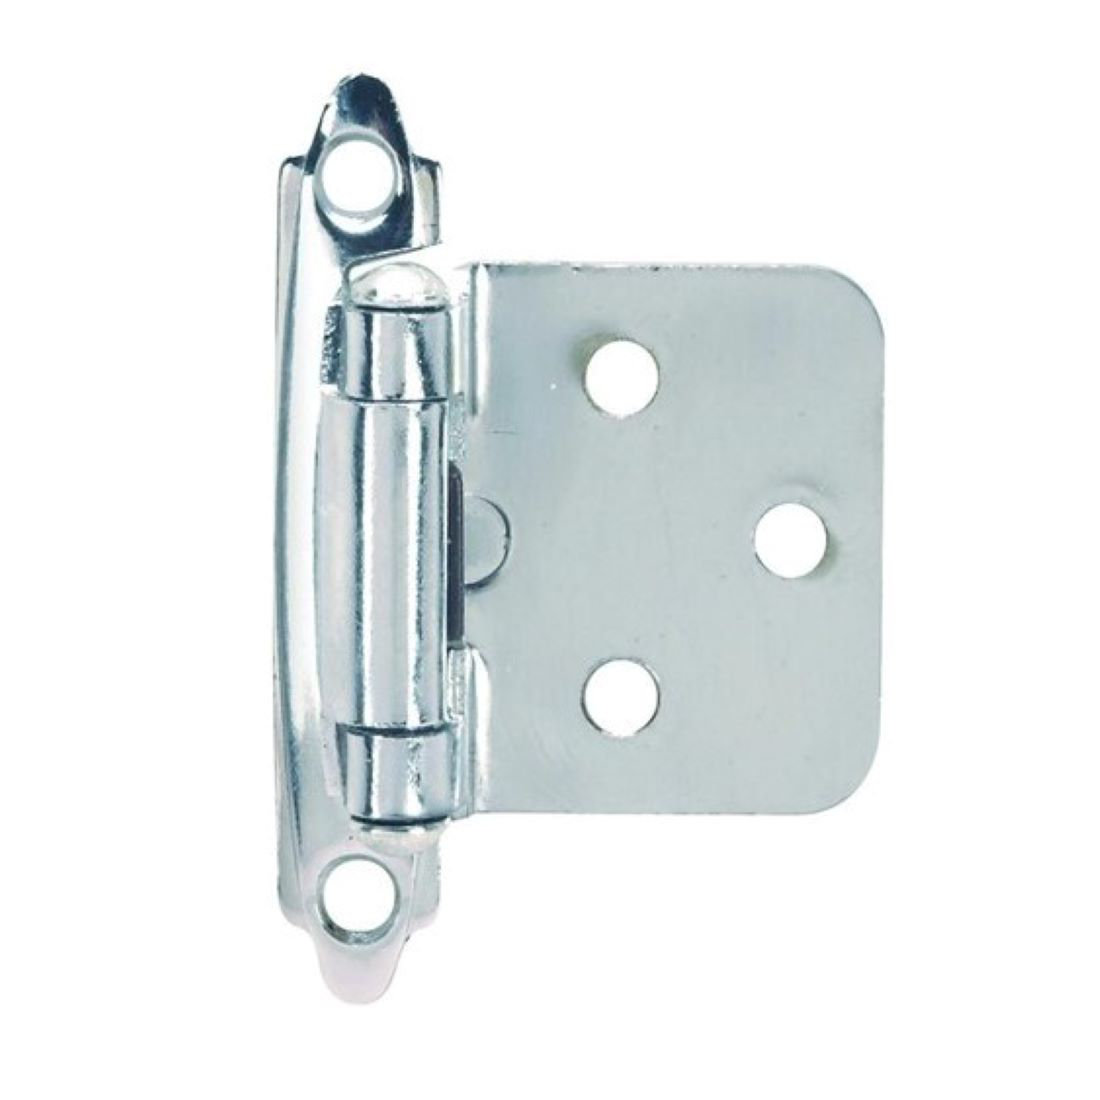 Villar Home Designs Mortised Heavy Duty Door Hinge With Soft Close Chrome